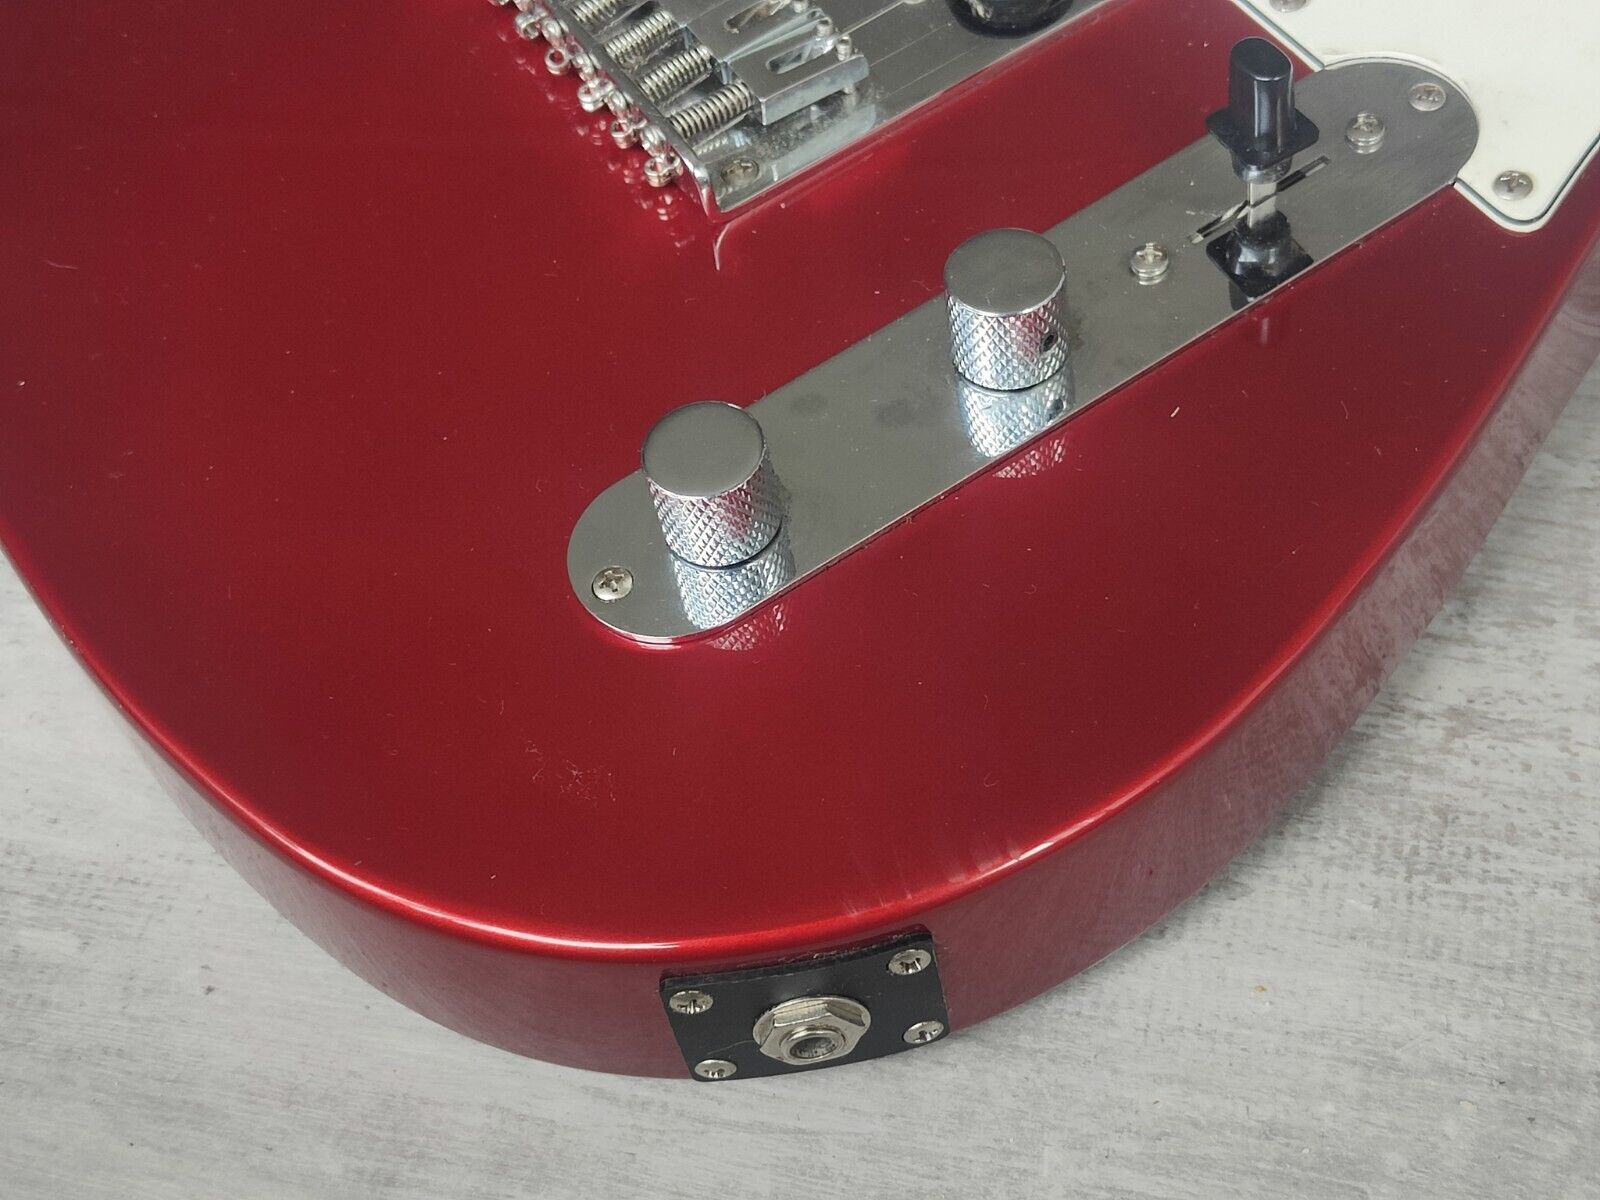 2014 Squier Affinity Series Telecaster (Red)